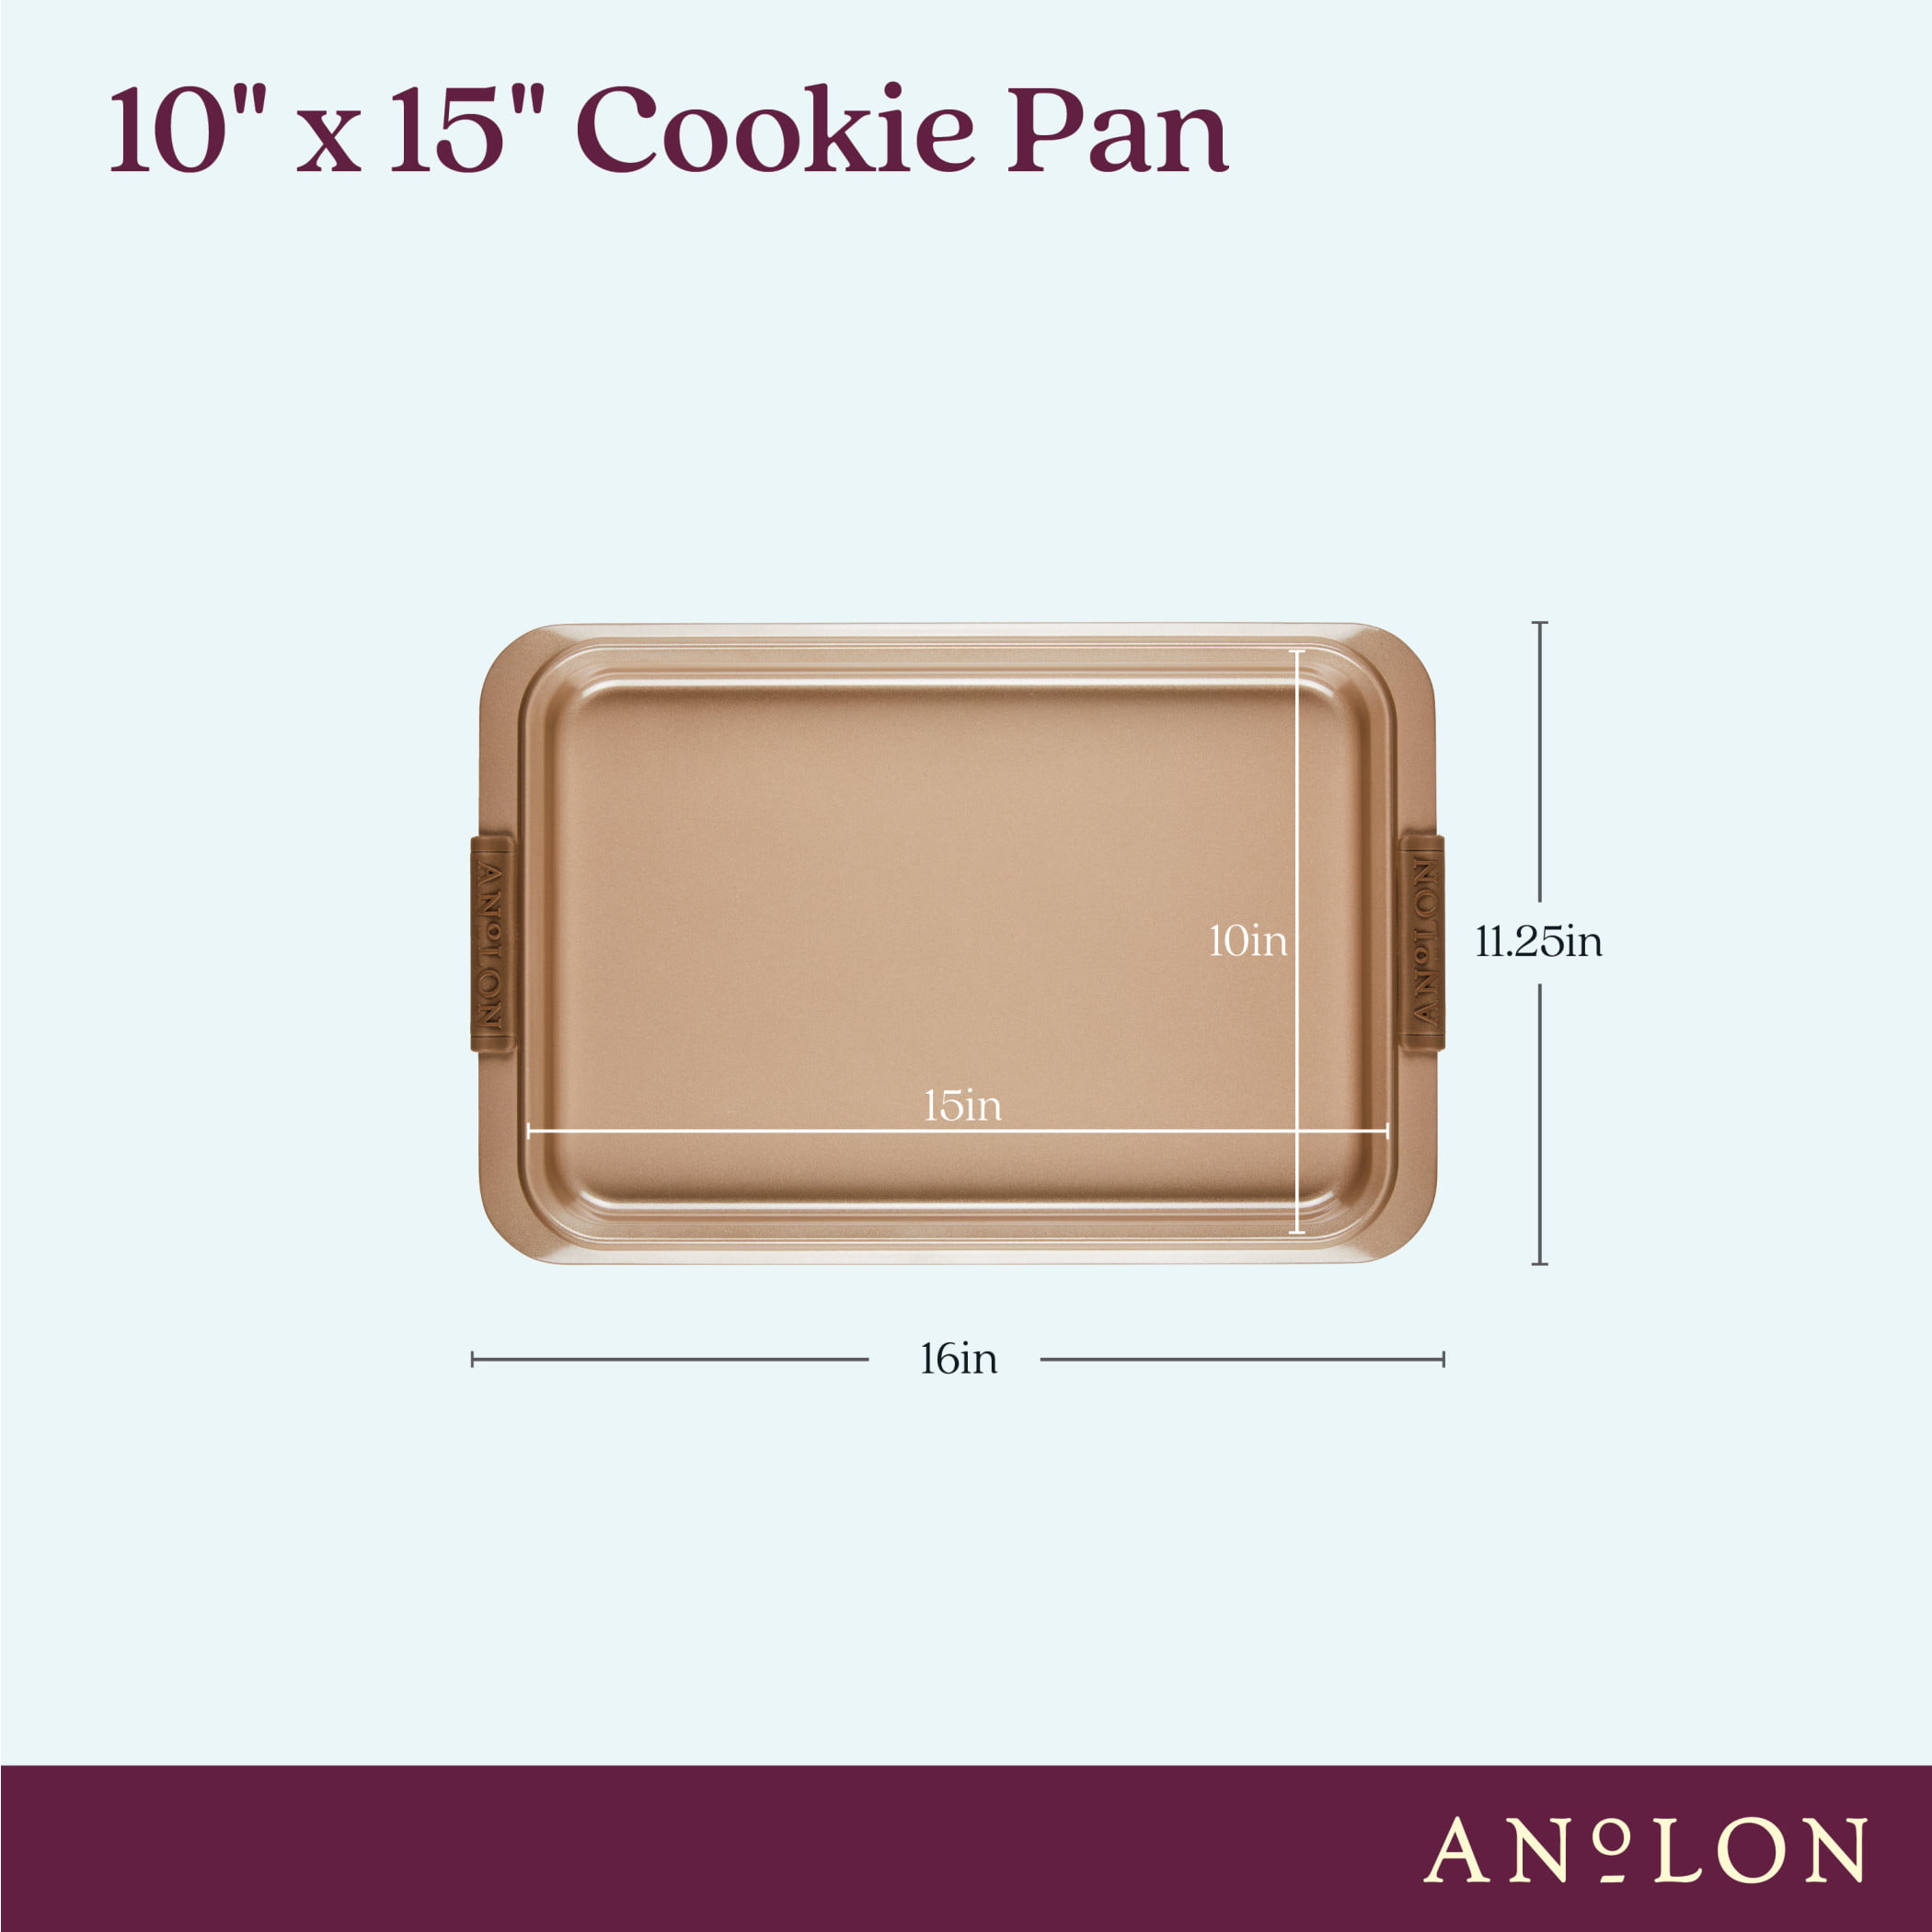 Anolon Advanced Bakeware Nonstick Cake Pan with Lid and Silicone Grips -  Bed Bath & Beyond - 9219328